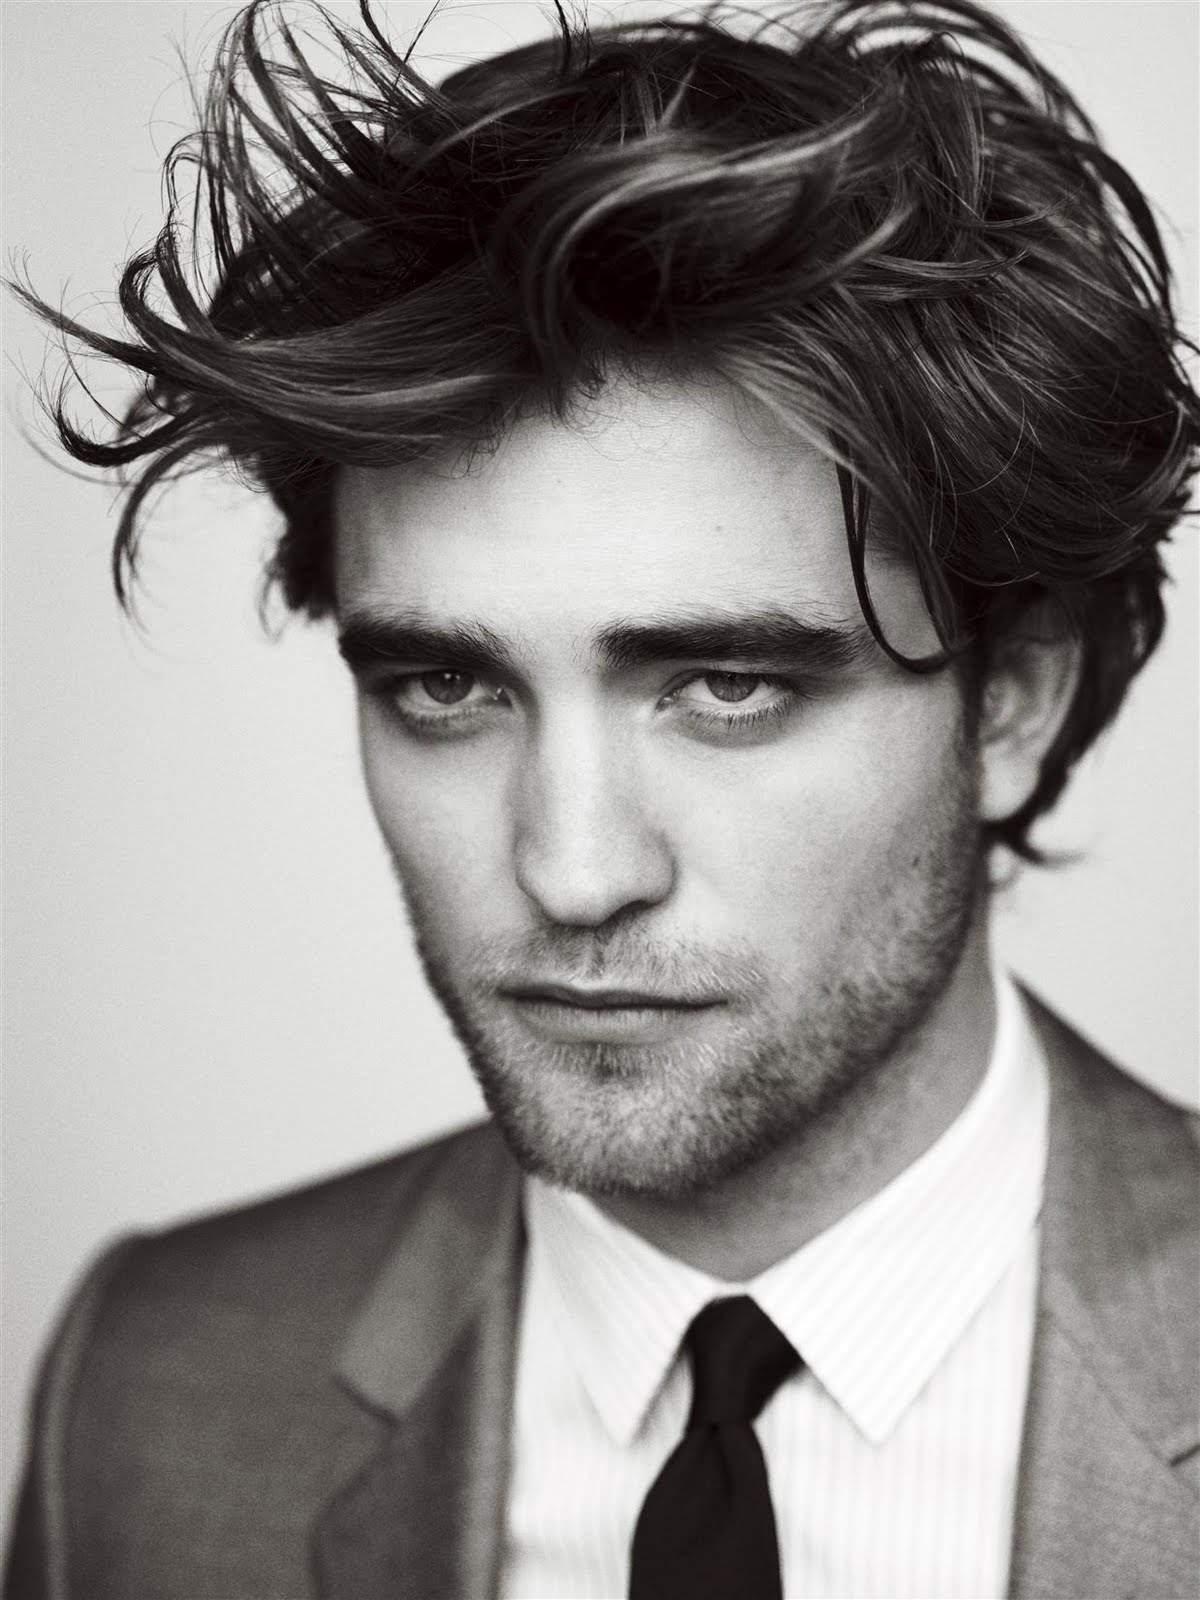 Robert Pattinson News: Sexy & Sweet: GQ Outtakes Now In HQ1200 x 1600